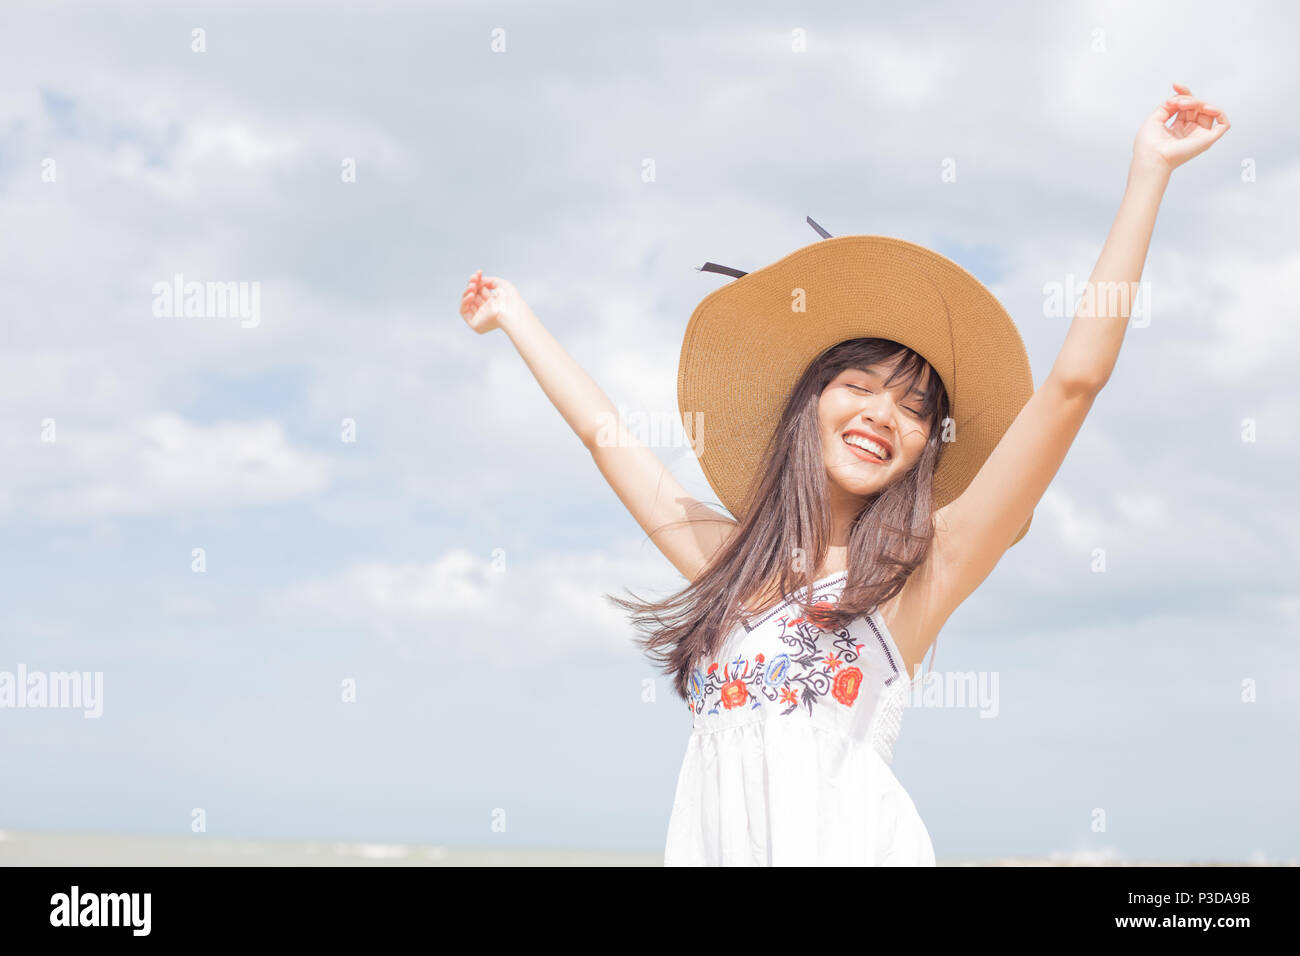 Thai girl enjoy and happy her relaxing on the beach, Hua Hin, Thailand Stock Photo